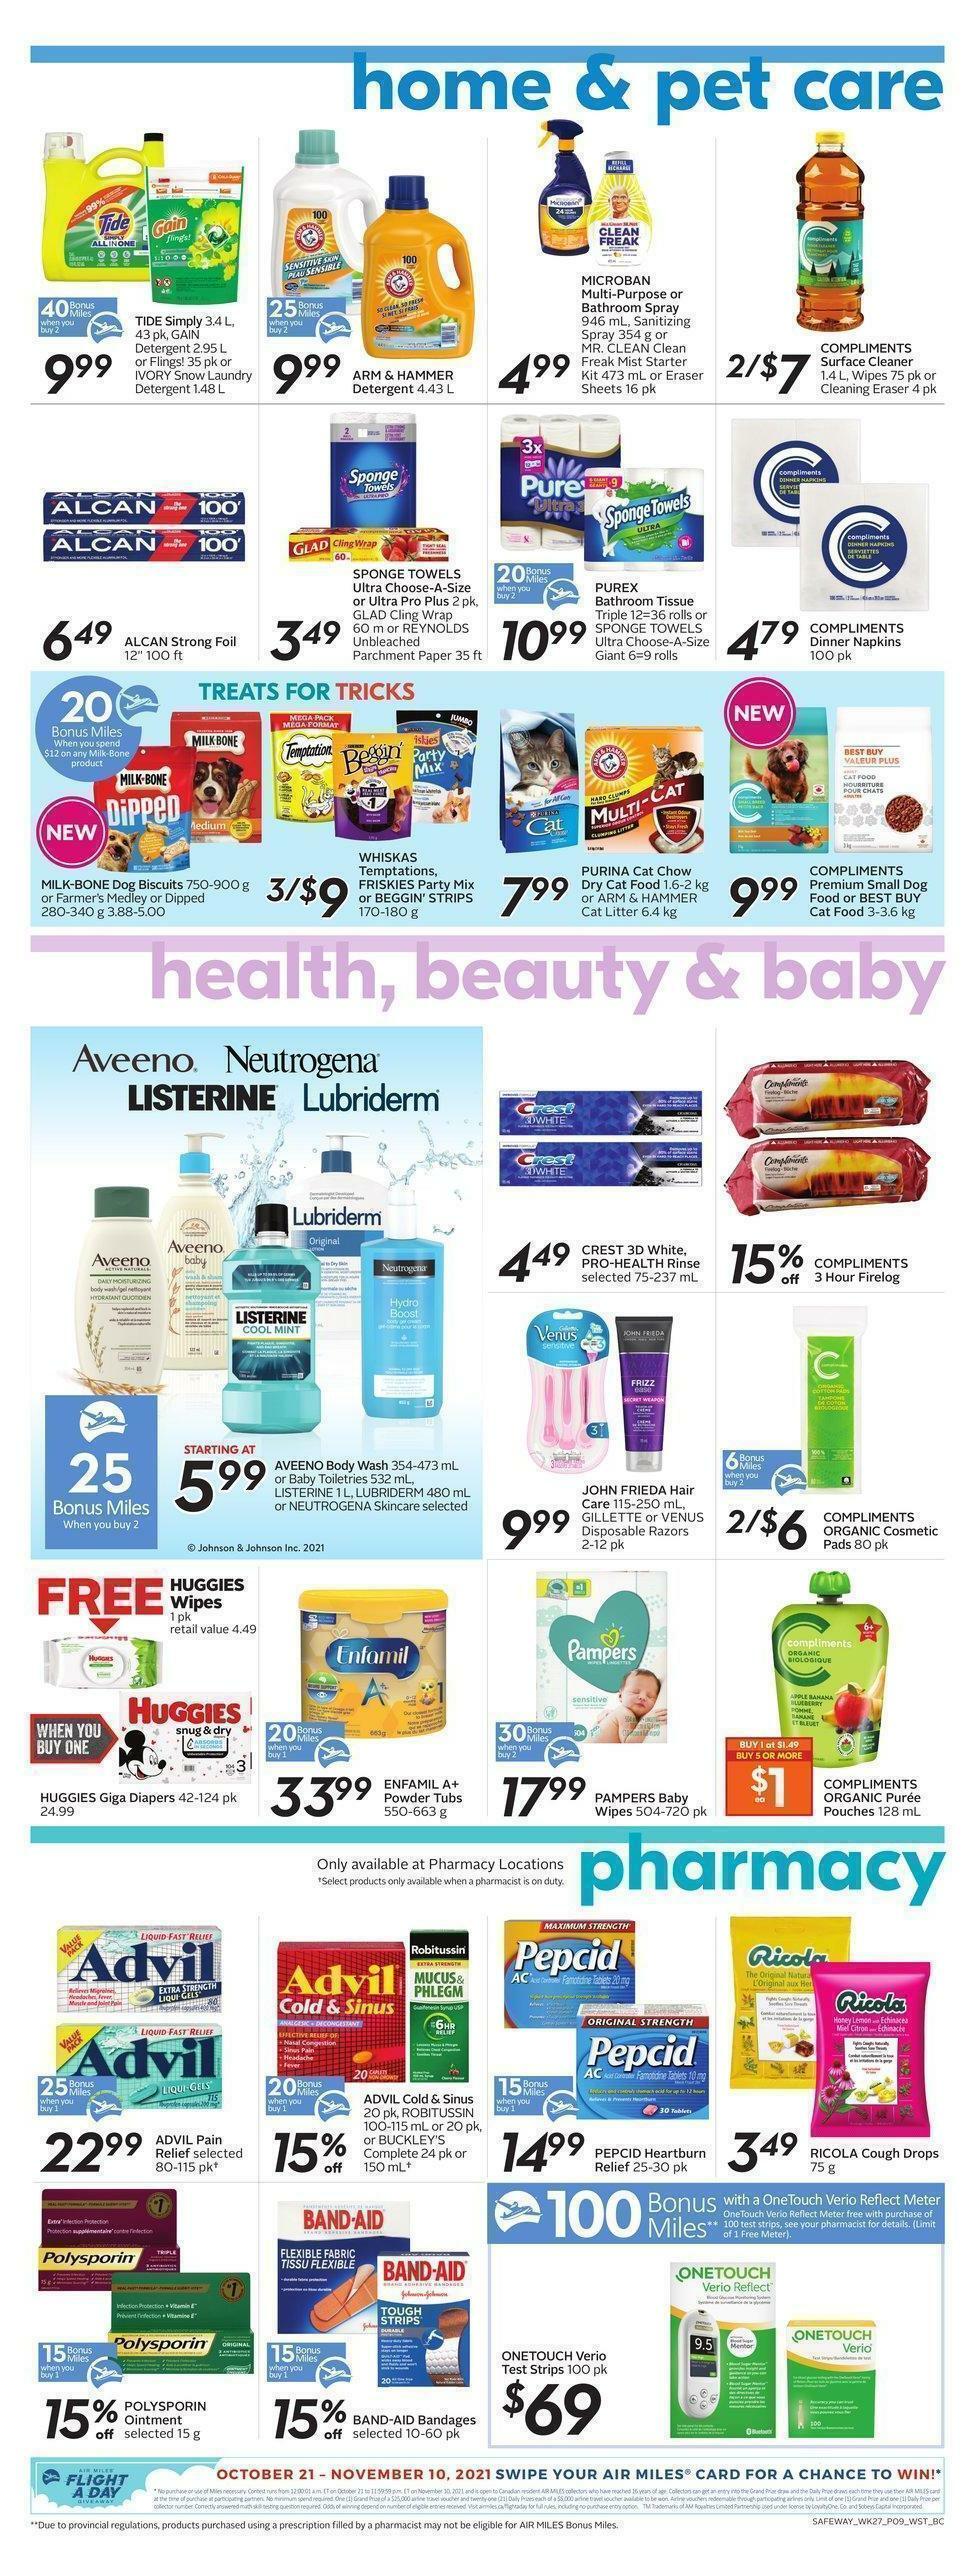 Safeway Flyer from October 28